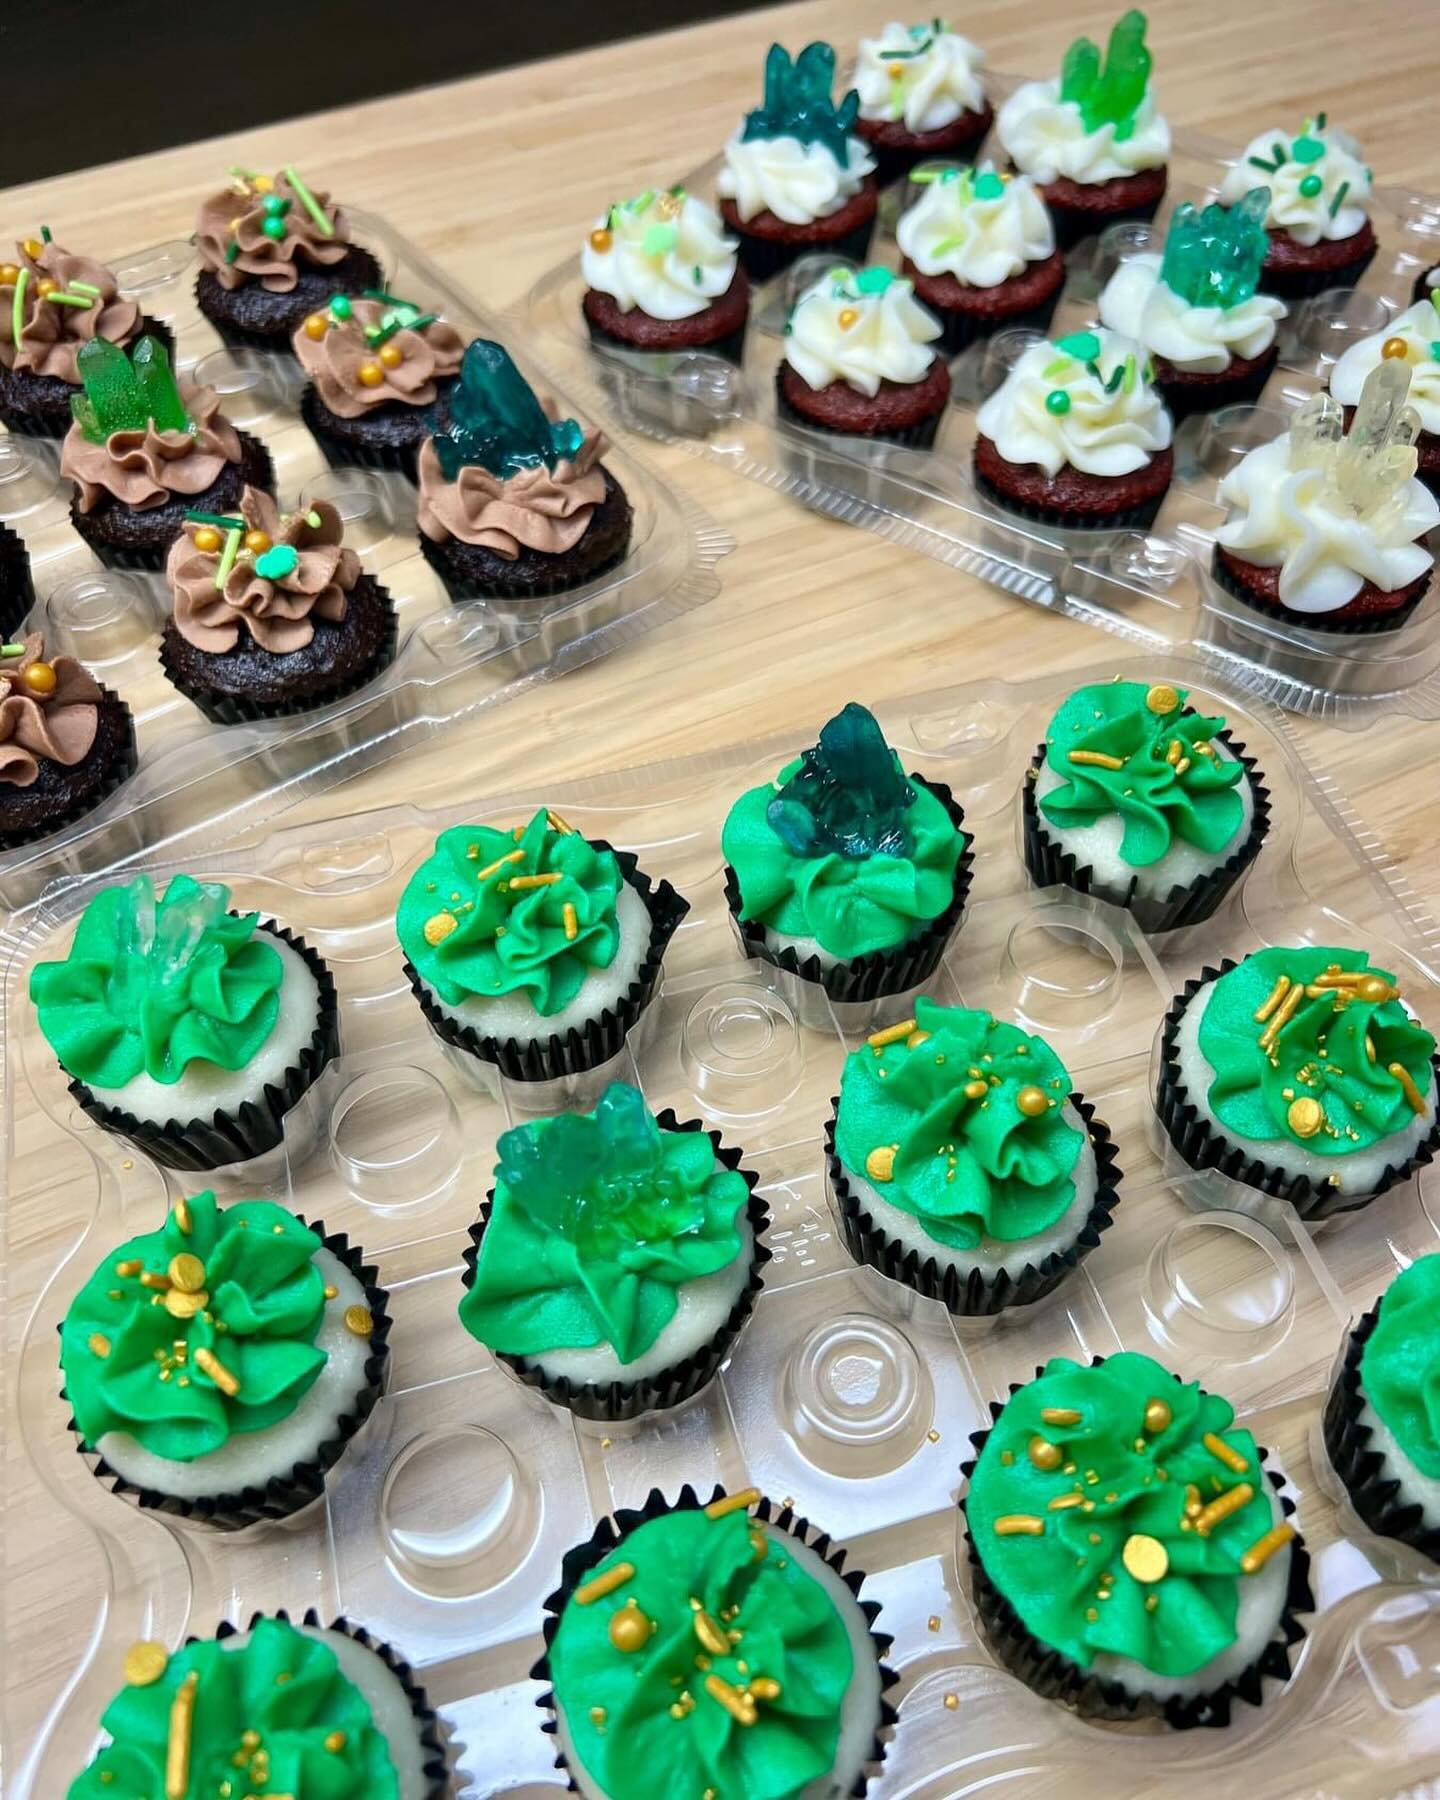 Some up close and personal photos of beautiful gem cupcakes we did for @gallery11crystals a few weeks back! Edible teal, green and crystal gem toppers really pulled these together.

 #johnsonvillecakes #crystalcupcakes #wacocrystals #cakesofwacotexas